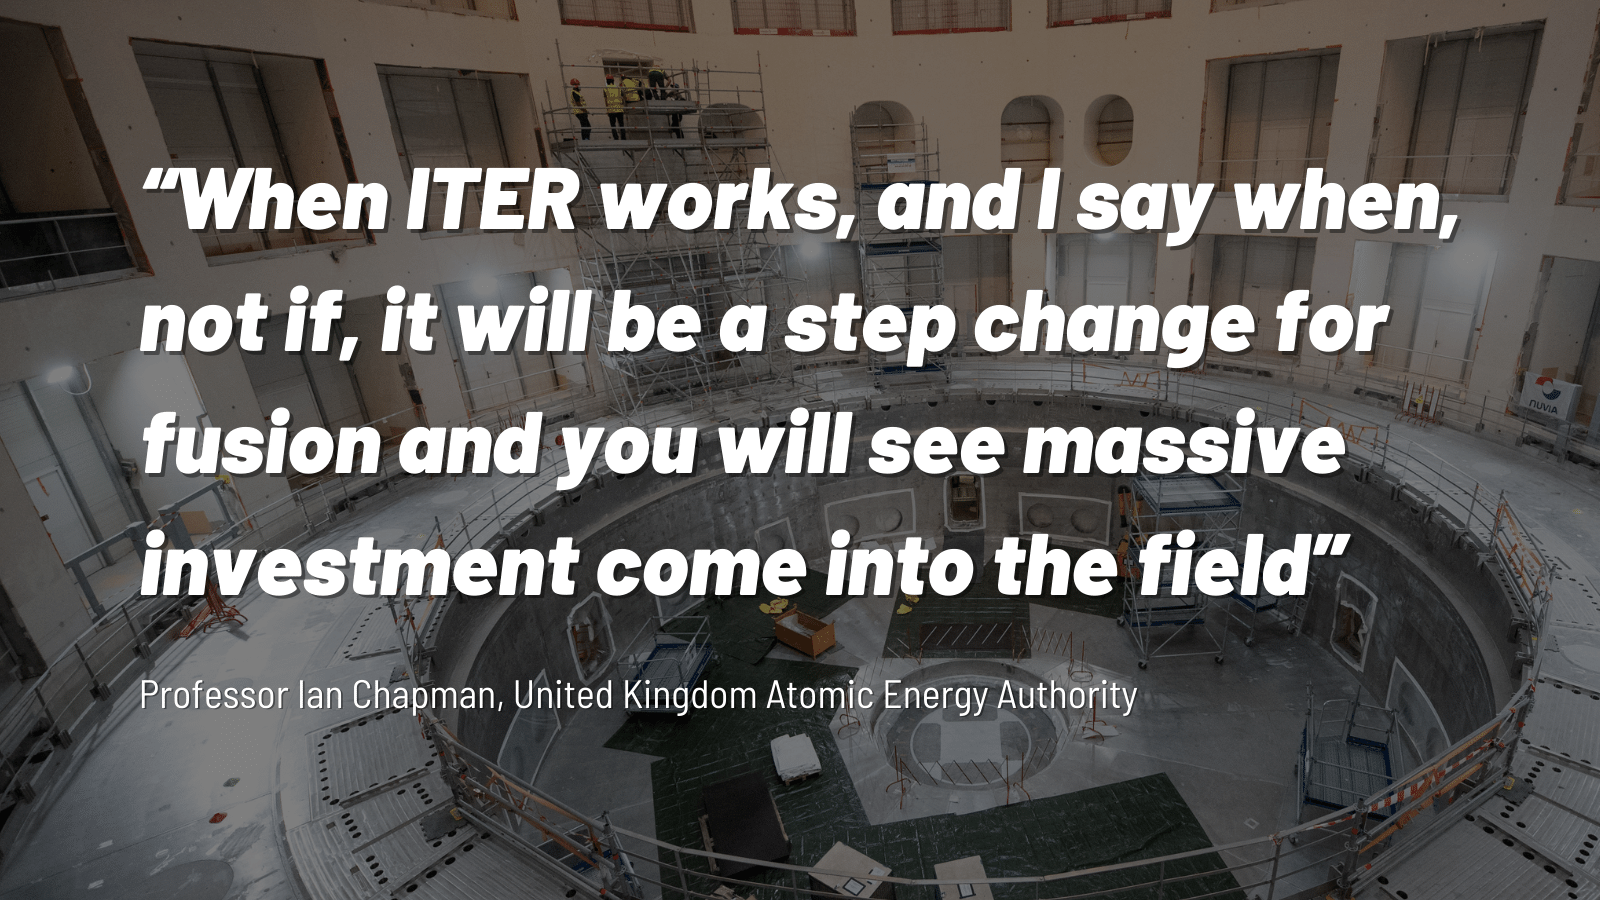 Experimental fusion reactors like ITER and China’s 'artificial sun’ will revolutionize energy technology.